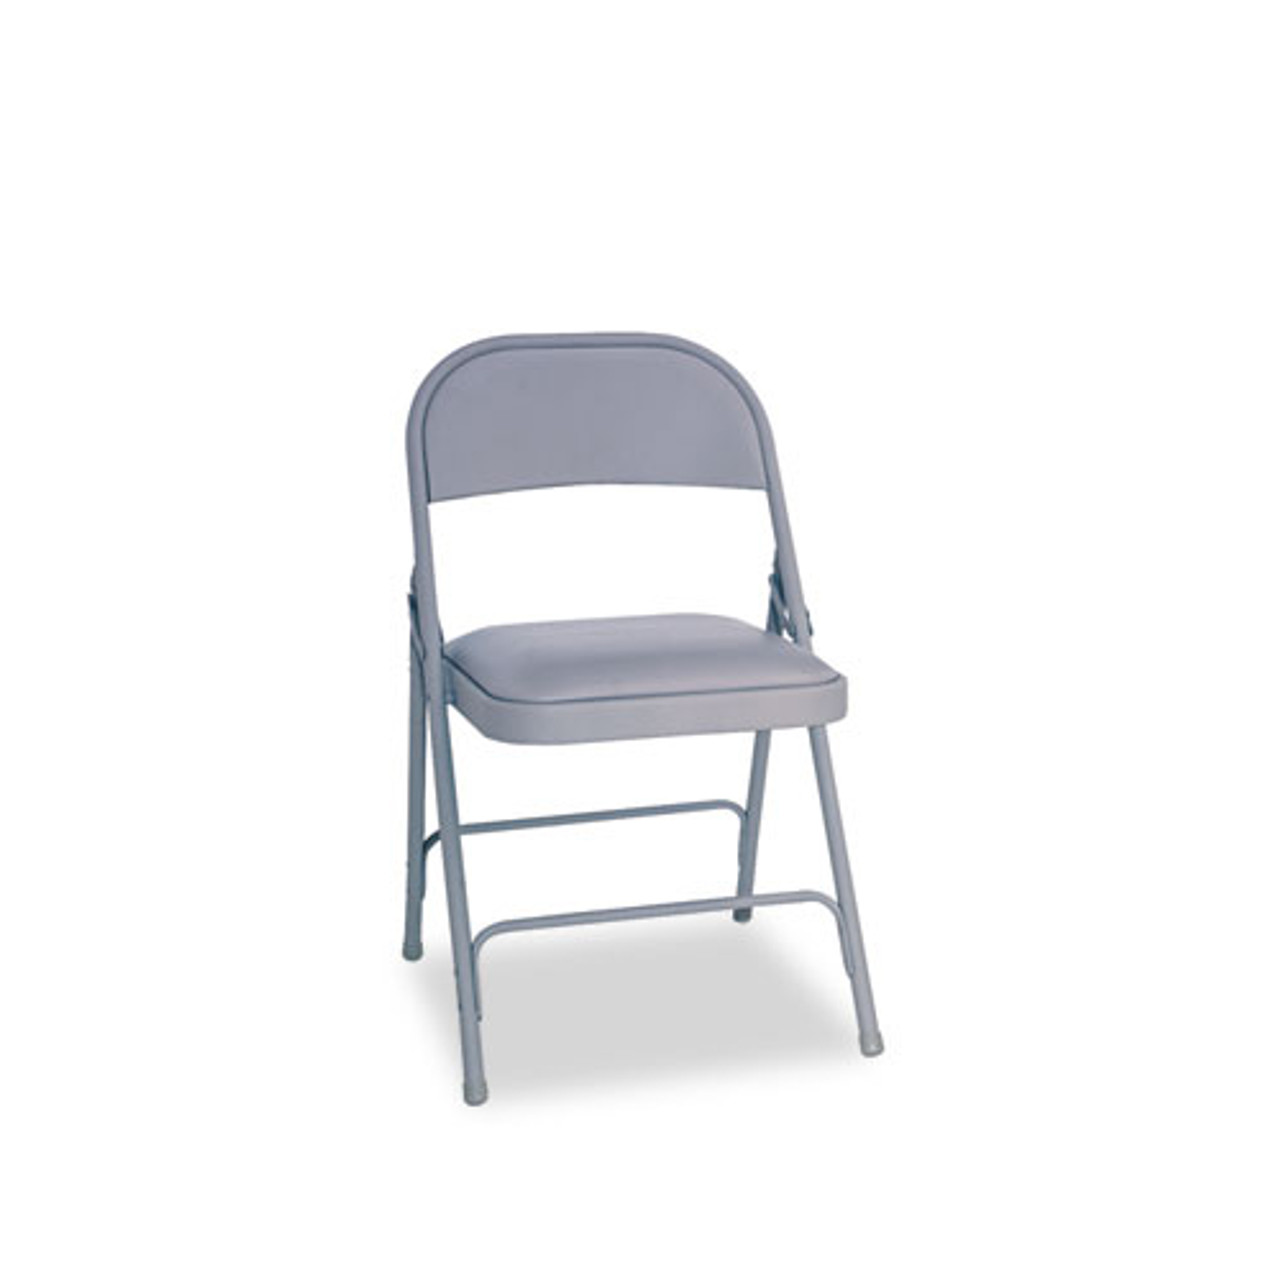 Steel Folding Chair With Two-Brace Support, Padded Seat, Light Gray, 4/carton, #AL-1241